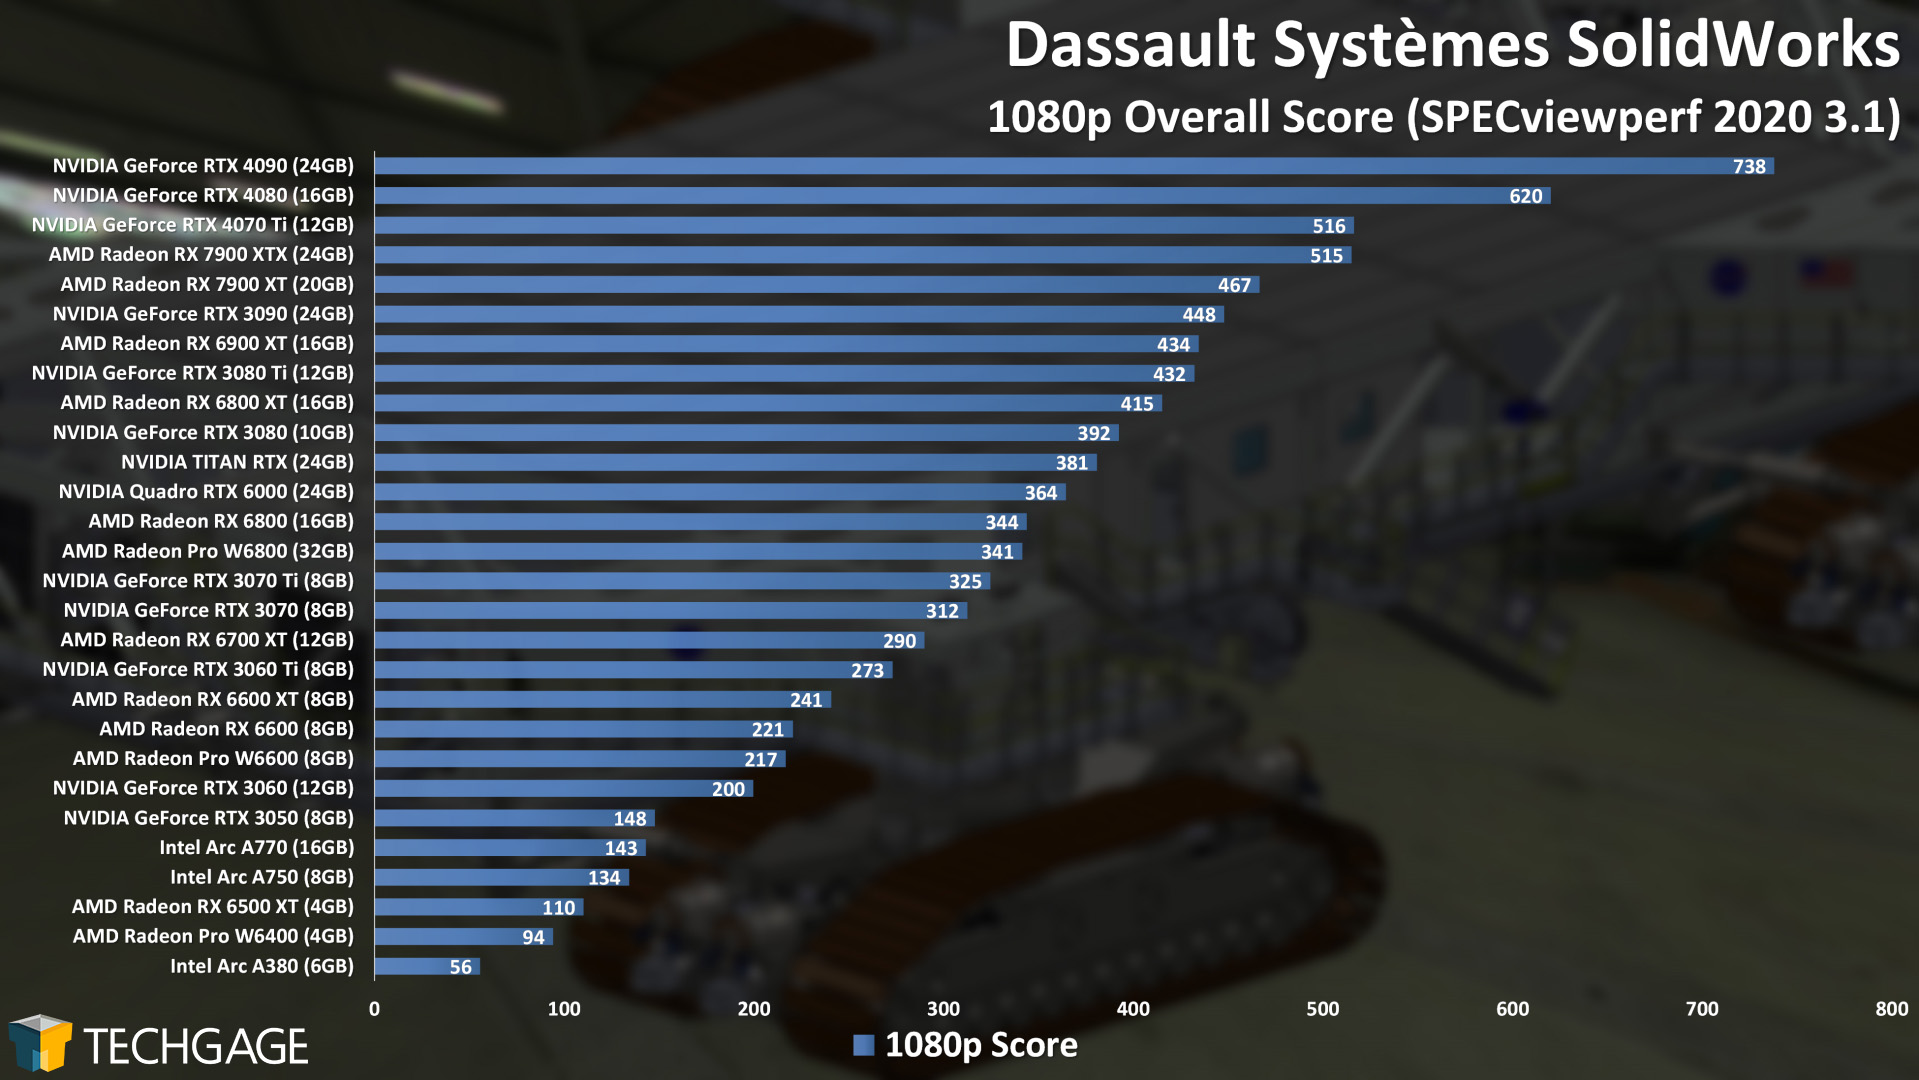 Dassault Systemes SolidWorks - 1080p Viewport Performance